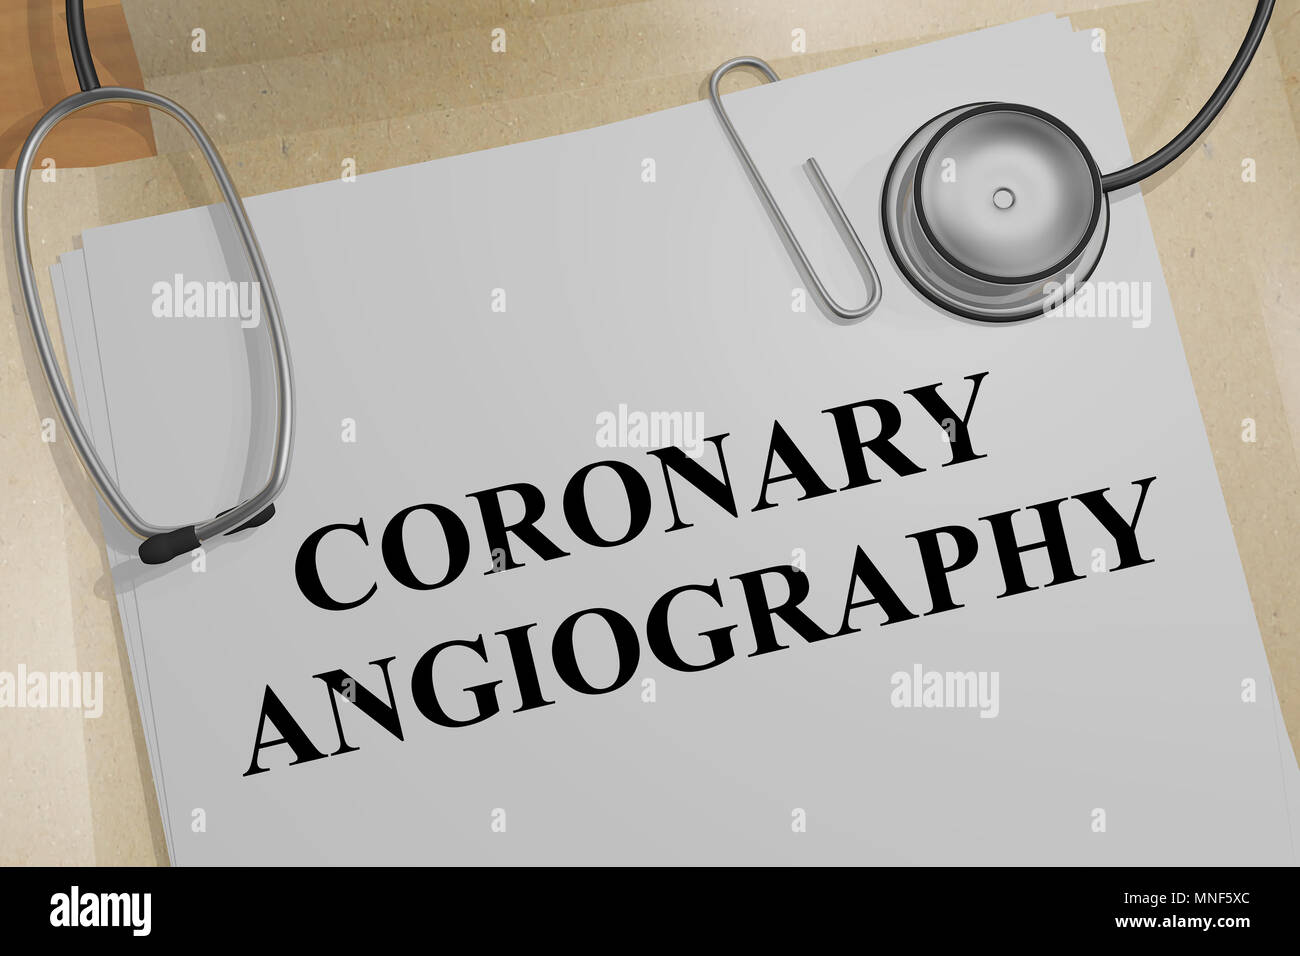 3D illustration of CORONARY ANGIOGRAPHY title on a medical document Stock Photo